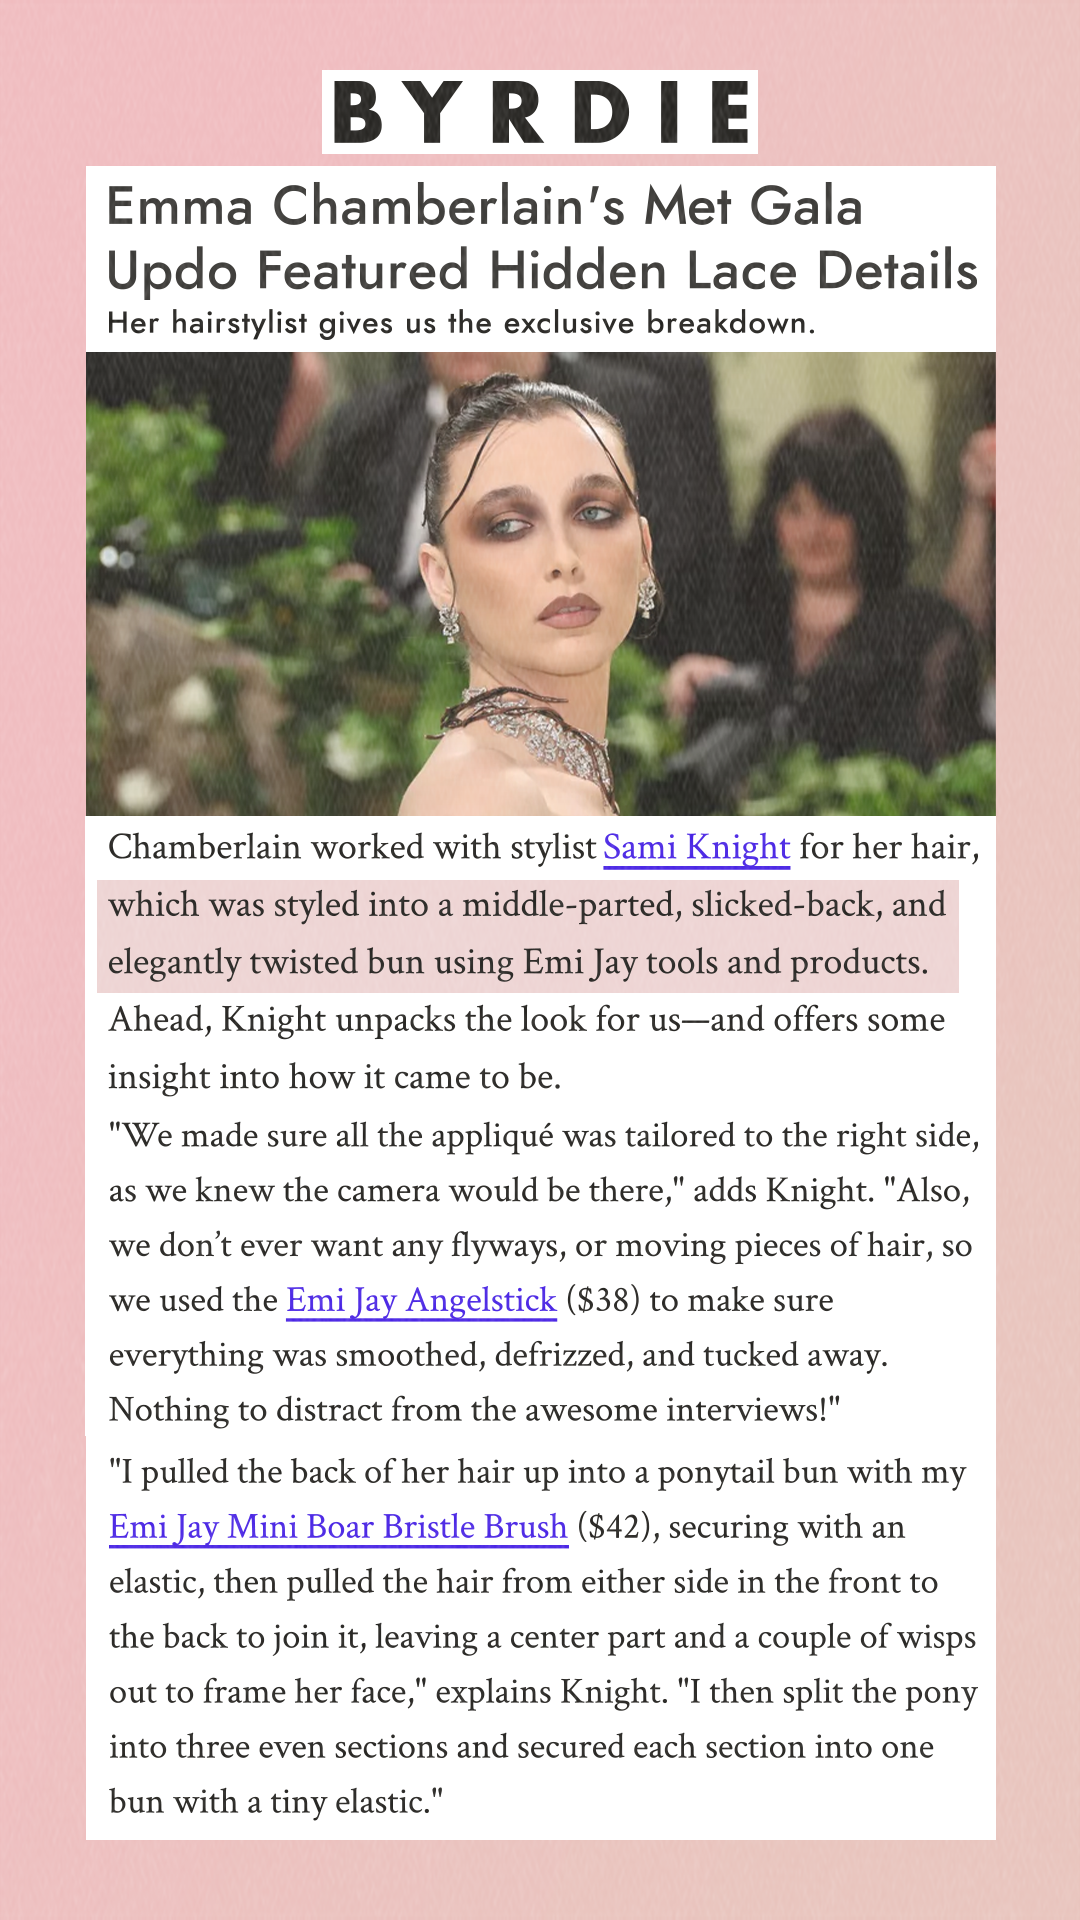 Emma Chamberlain's Met Gala Updo Featured Hidden Lace Details Her hairstylist gives us the exclusive breakdown.   Chamberlain worked with stylist Sami Knight for her hair, which was styled into a middle-parted, slicked-back, and elegantly twisted bun using Emi Jay tools and products. Ahead, Knight unpacks the look for us—and offers some insight into how it came to be. 'We made sure all the appliqué was tailored to the right side, as we knew the camera would be there,' adds Knight. 'Also, we don’t ever want any flyways, or moving pieces of hair, so we used the Emi Jay Angelstick ($38) to make sure everything was smoothed, defrizzed, and tucked away. Nothing to distract from the awesome interviews!' 'I pulled the back of her hair up into a ponytail bun with my Emi Jay Mini Boar Bristle Brush ($42), securing with an elastic, then pulled the hair from either side in the front to the back to join it, leaving a center part and a couple of wisps out to frame her face,' explains Knight. 'I then split the pony into three even sections and secured each section into one bun with a tiny elastic.'